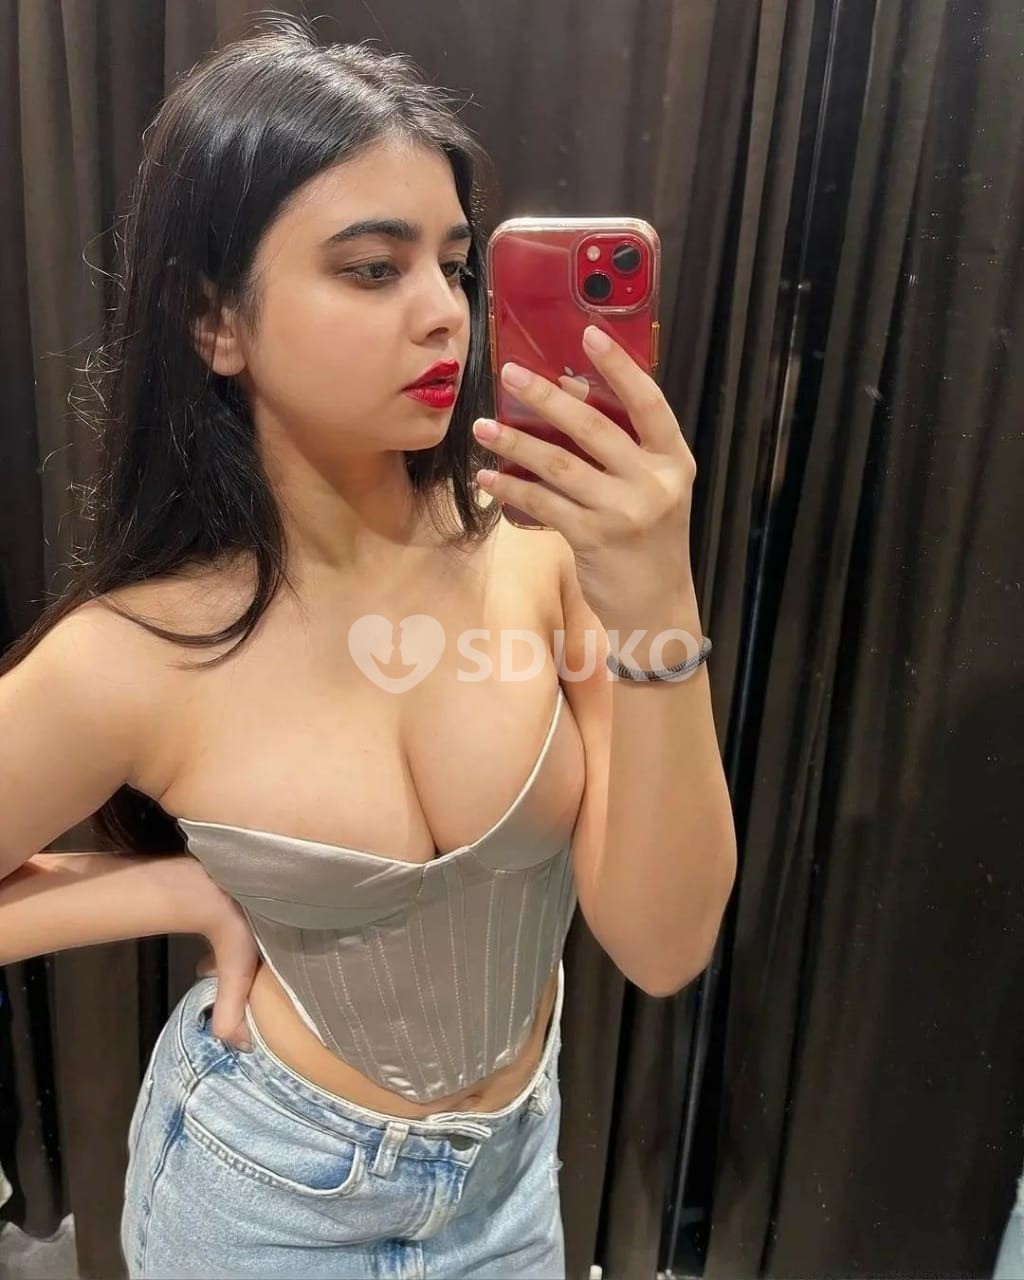 YEHAHANKA ..💙CALL ME PAYAL 🤙 LOW PRICE UNLIMITED SHOOT 100% GENUINE SEXY VIP CALL GIRLS ARE PROVIDED SECURE SERVIC